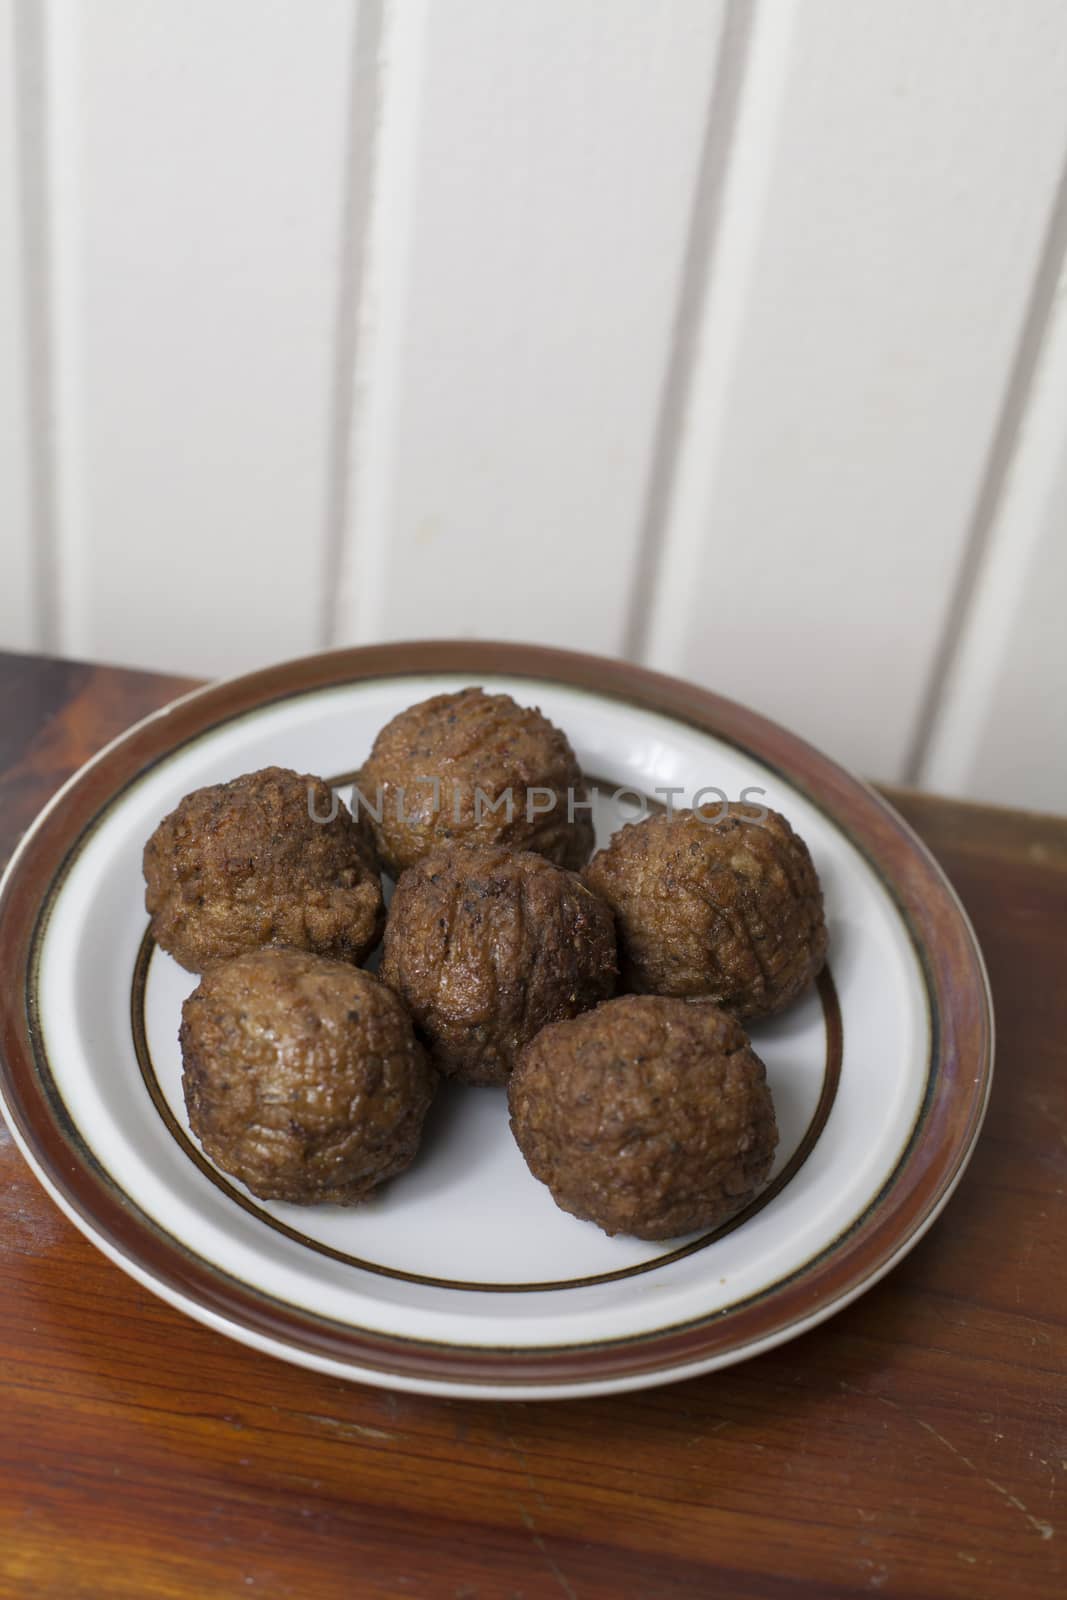 Five large soy-based meatballs on a small plate